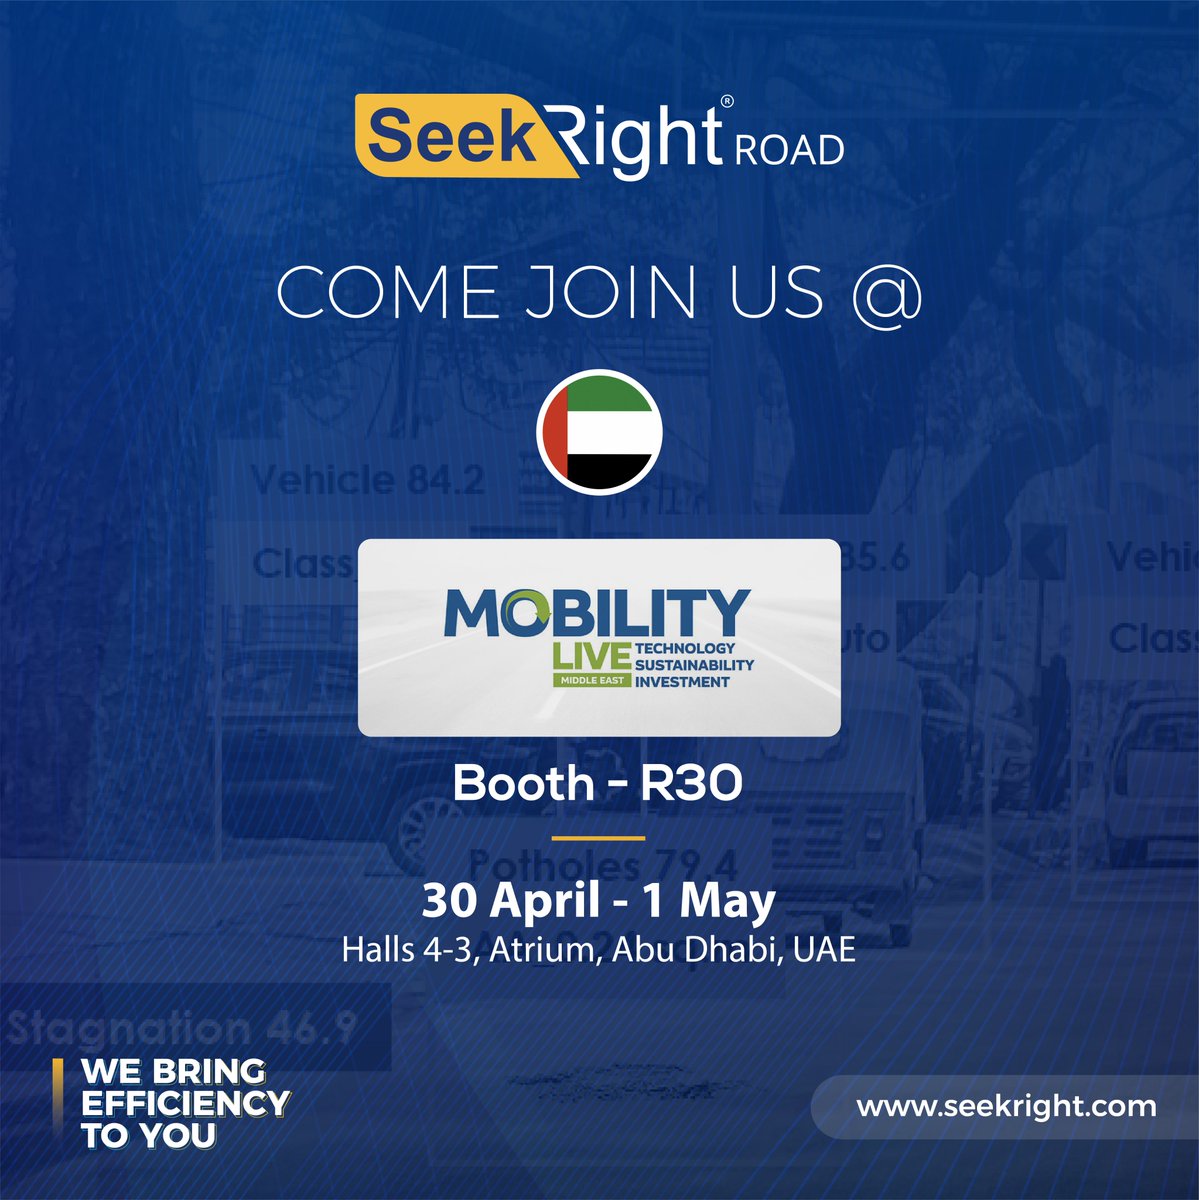 WE ARE EXCITED TO SEE YOU!

Join us tomorrow at Mobility LIVE Middle East, Abu Dhabi, UAE 🇦🇪

SeekRight - We Bring Efficiency To You!

#SeekRight #MobilityLIVE #AbuDhabi #UAE